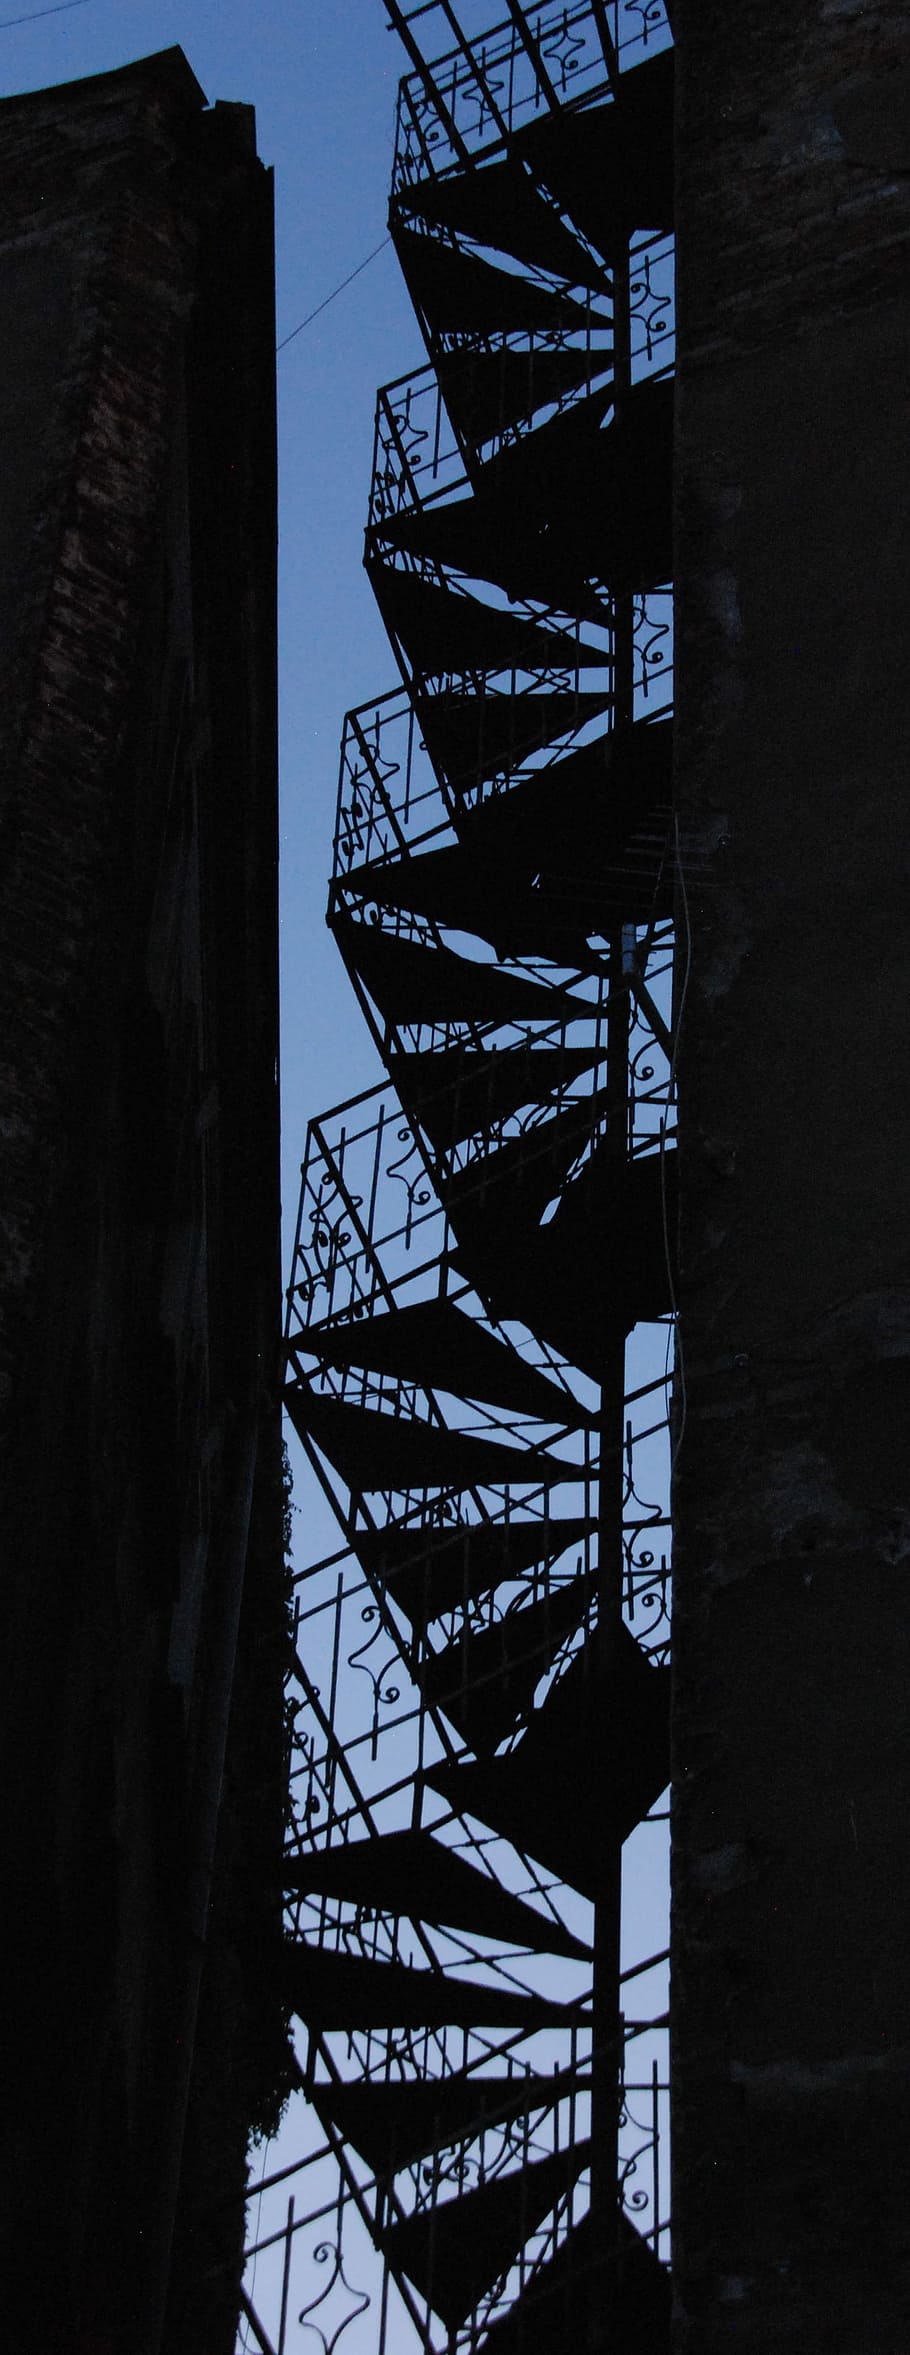 Trap, Silhouette, Evening, Metal, Dark, architecture, built structure, industry, outdoors, girder